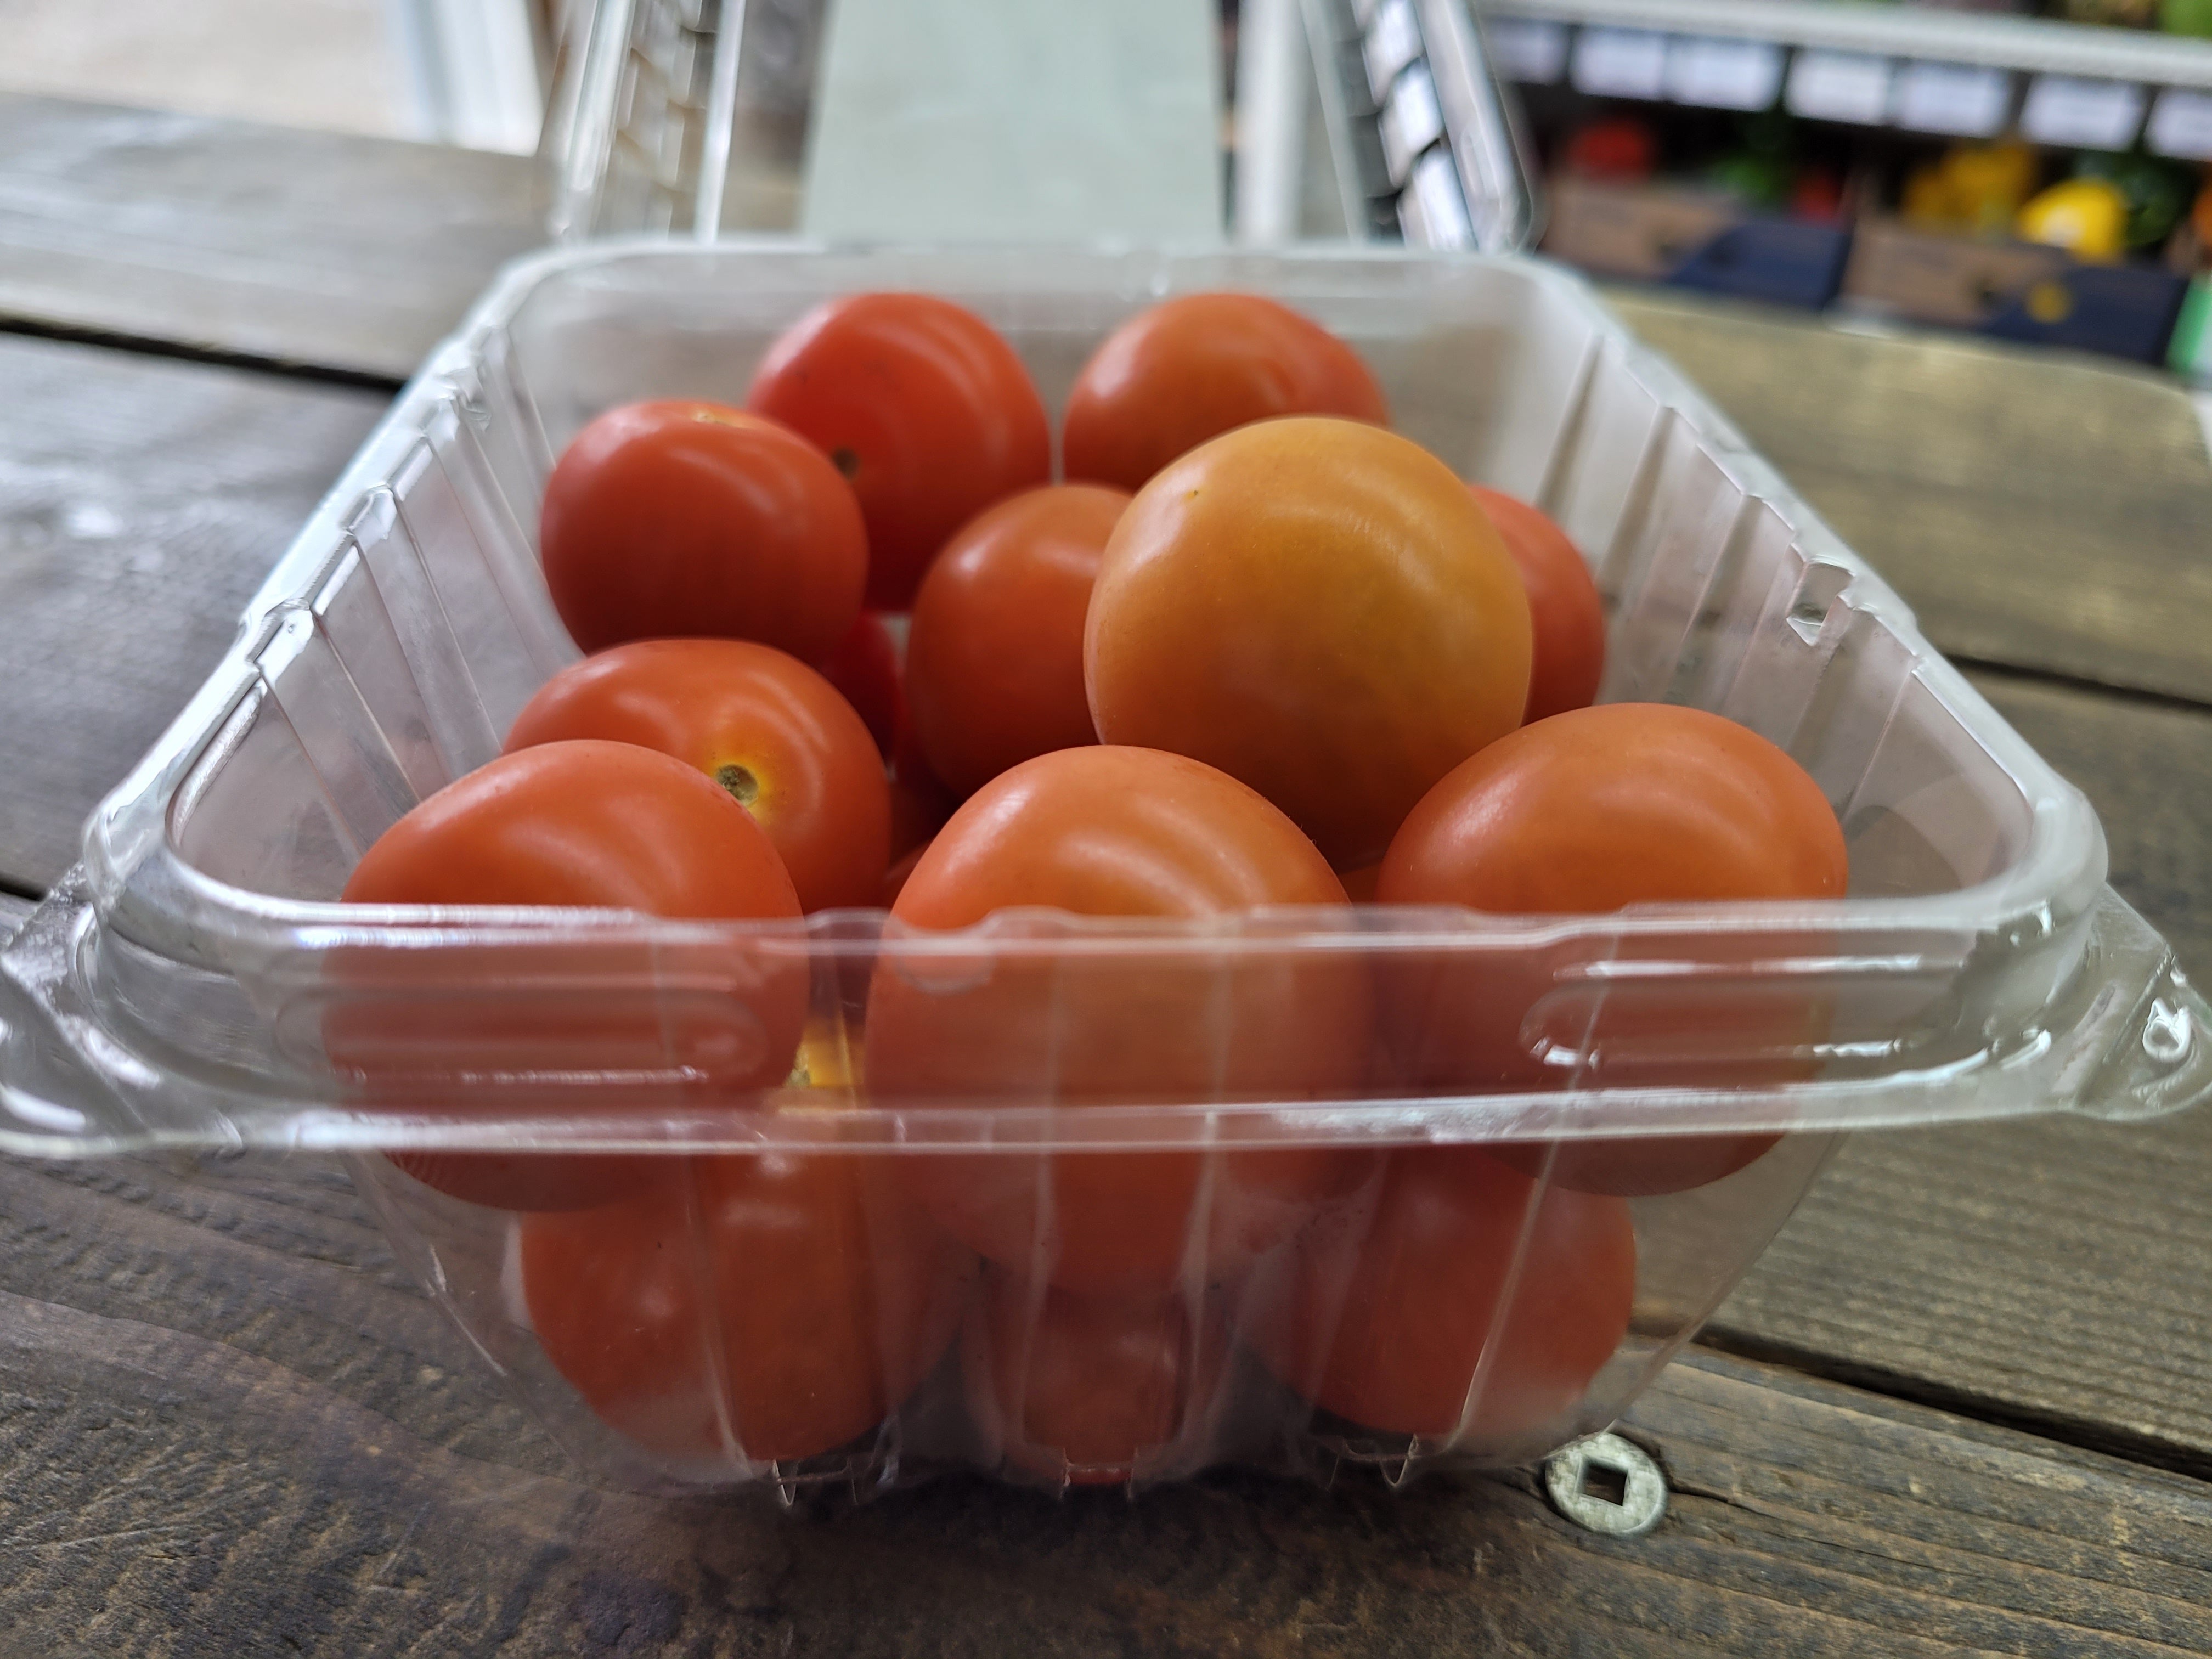 Cherry/Grape Tomatoes - Local (Homegrown)